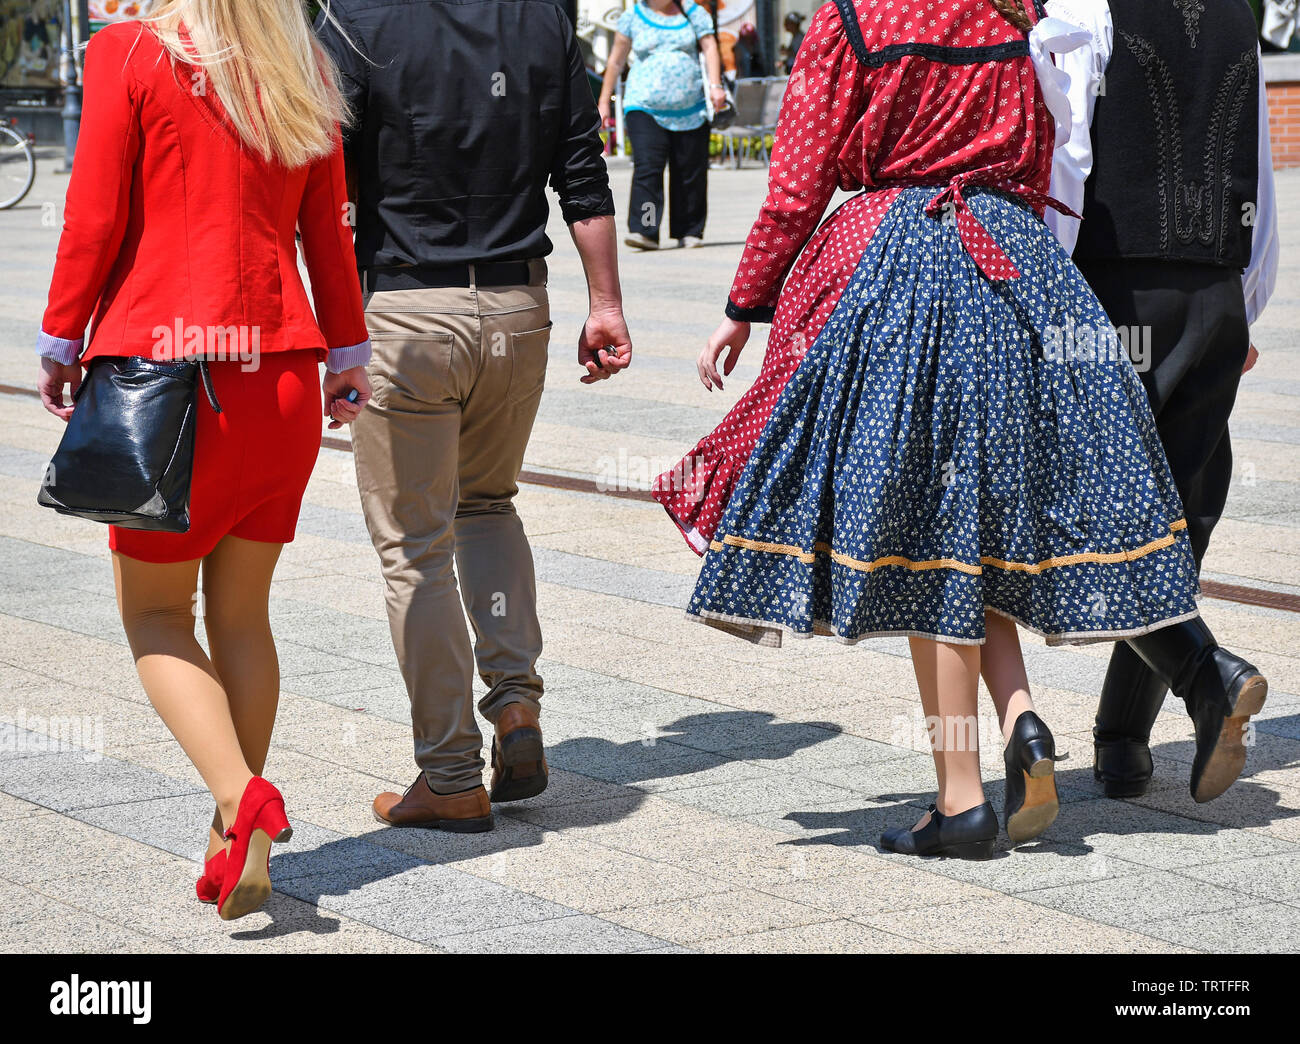 People on the street in regular and traditional clothing Stock Photo